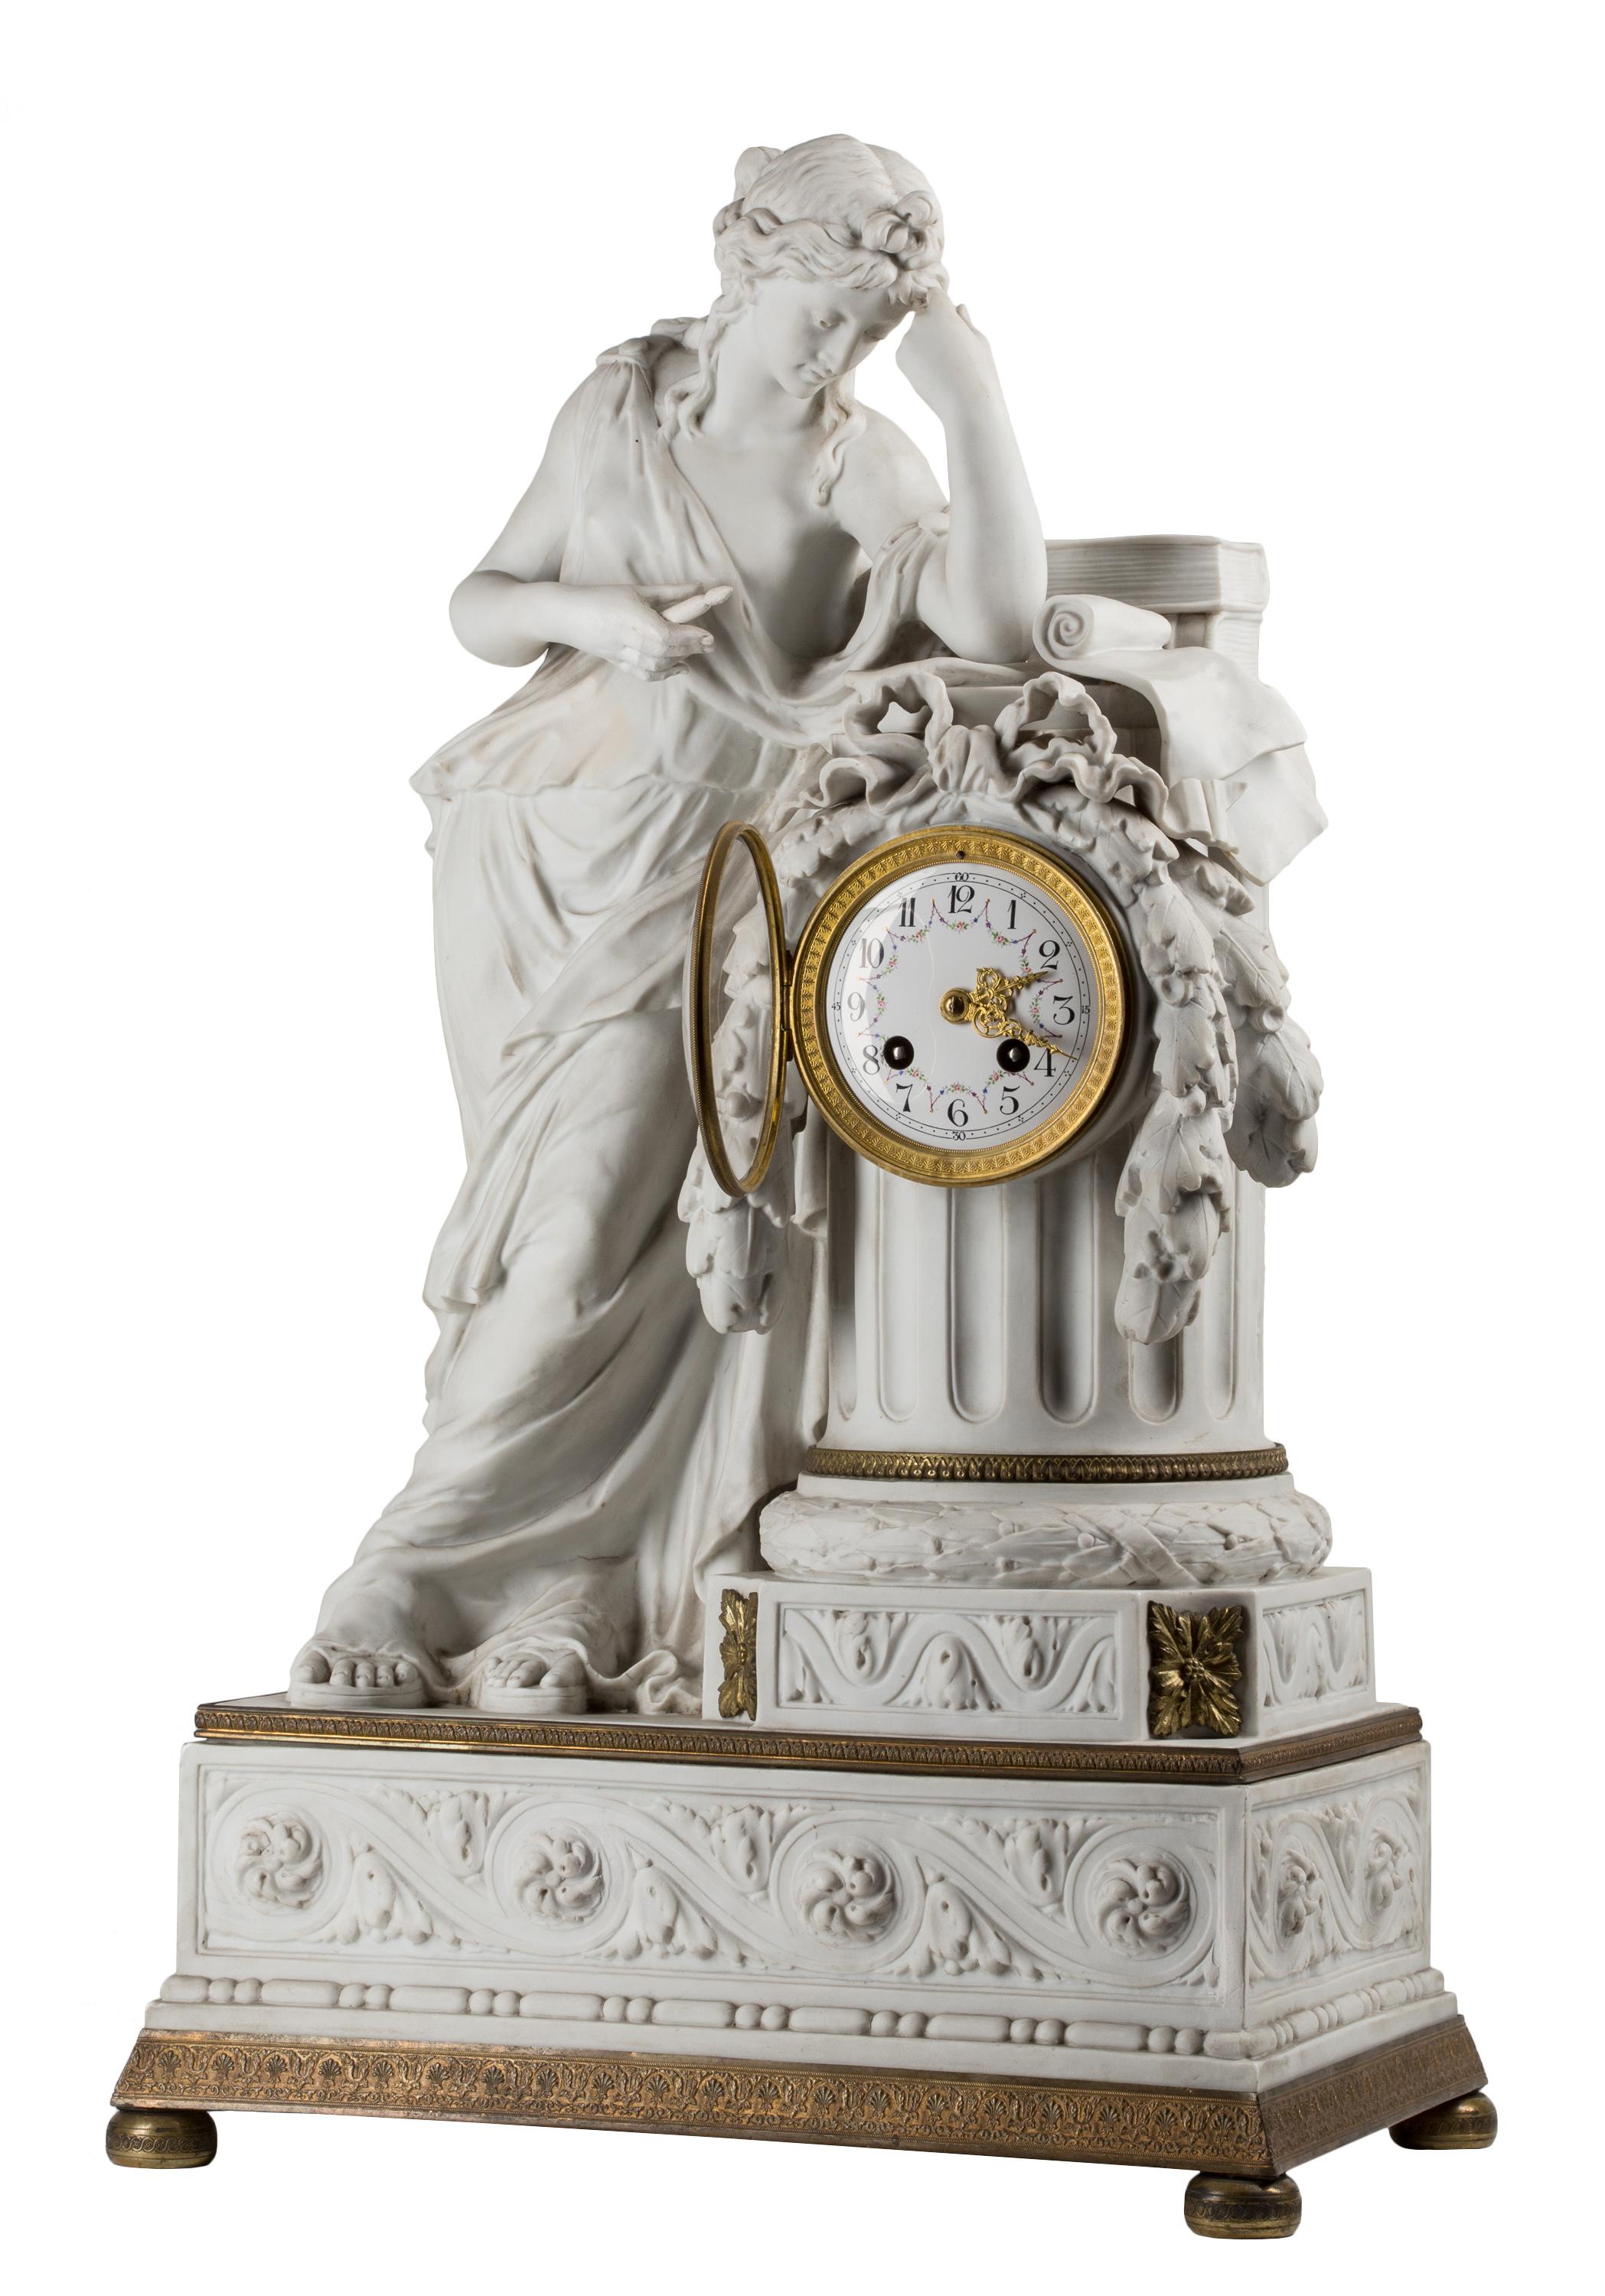 19th century French Empire style Neoclassical mantel clock in bisque porcelain, featuring the figure of Clio, the Greek muse of literature and history. The movement is stamped 